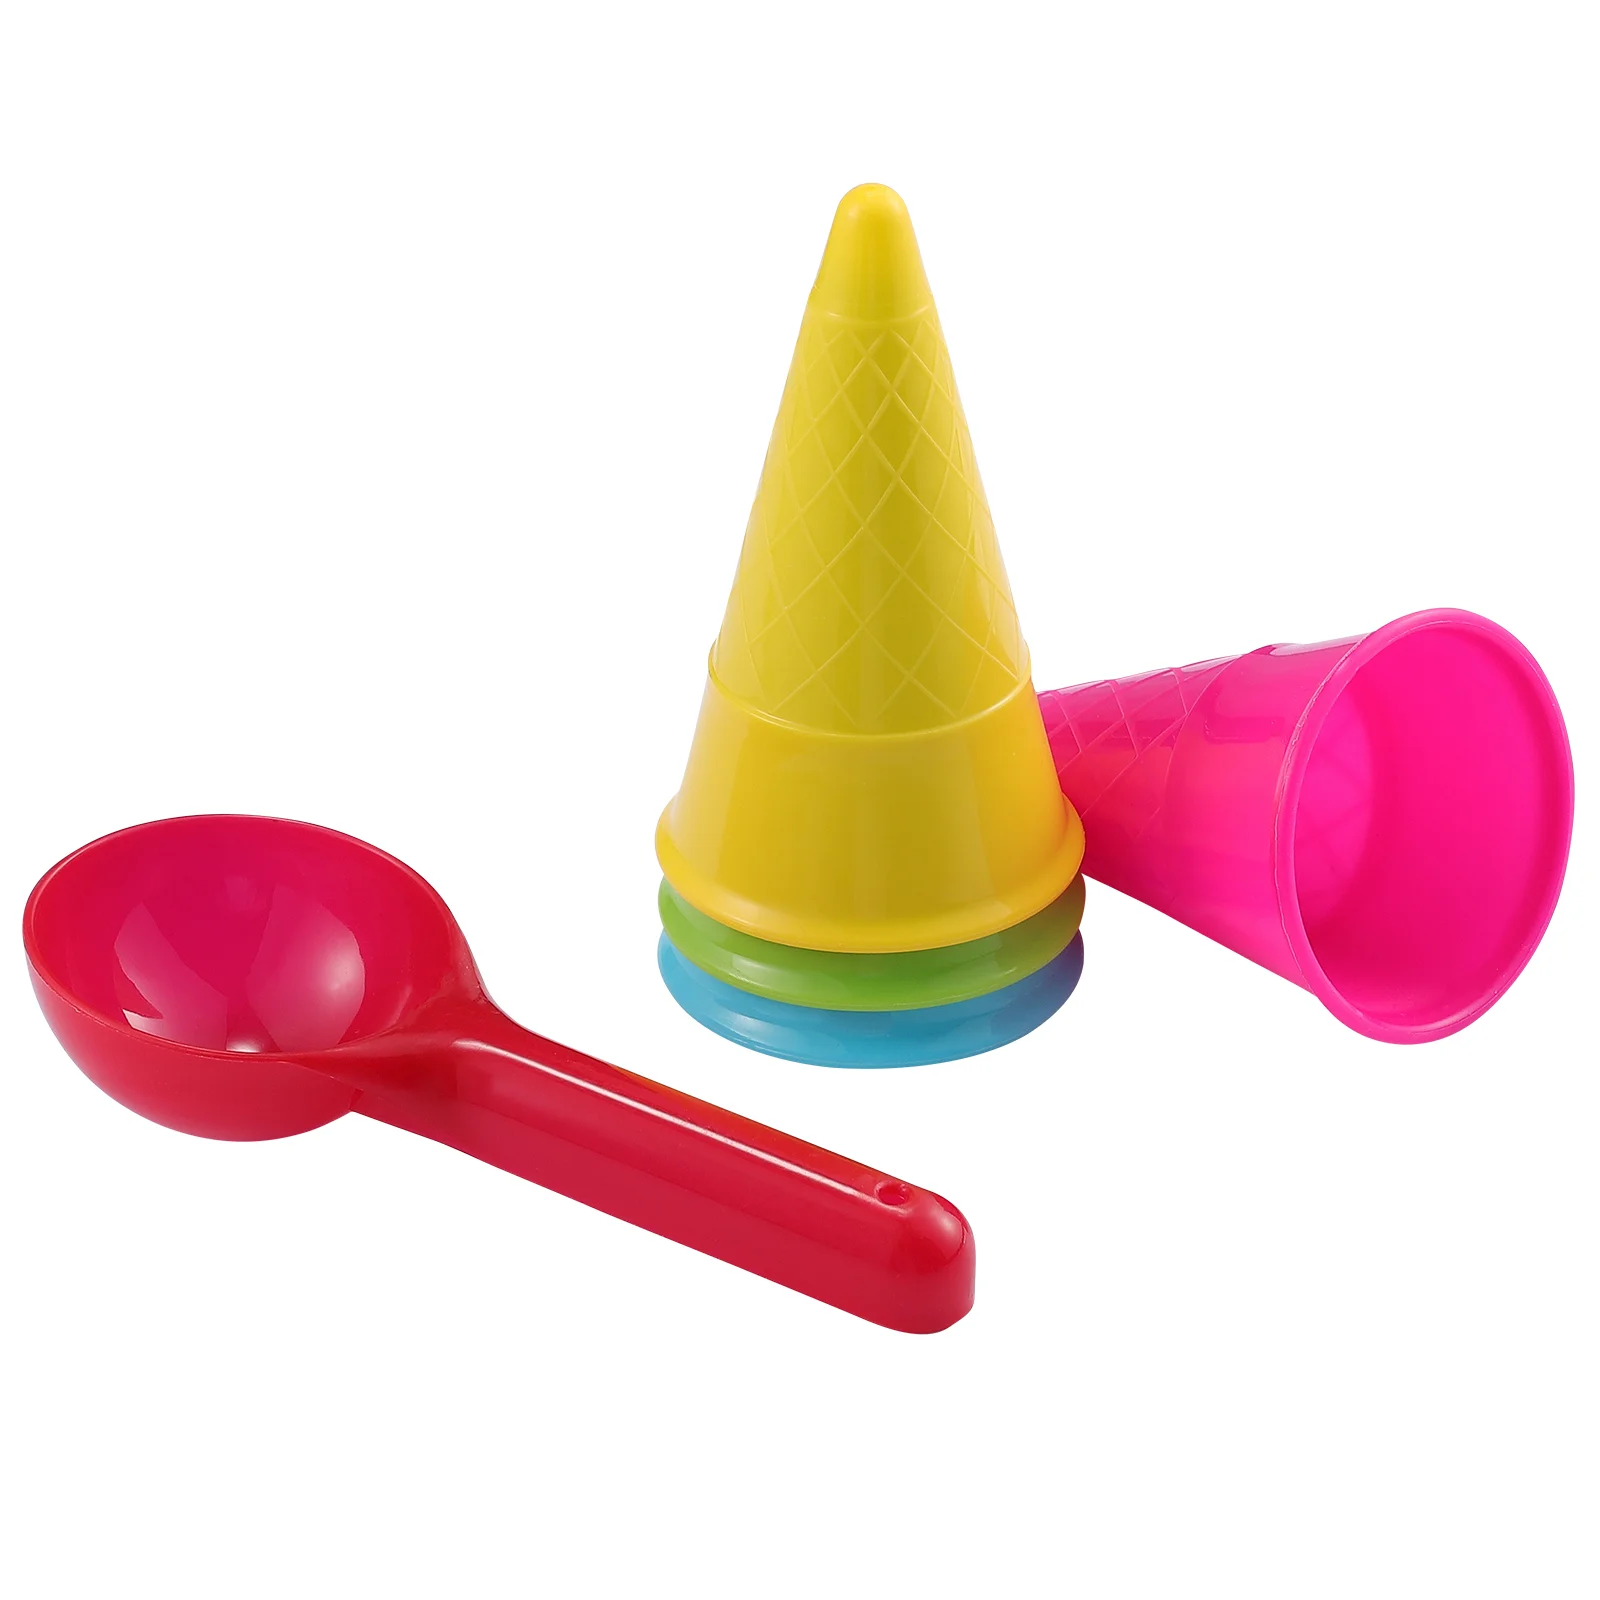 

Toyandona Play House Beach Ice Cream Cone Scoop Set (random Color 5pcs/pack) 2 Packs for Sale Kids Toys Playing with Sand